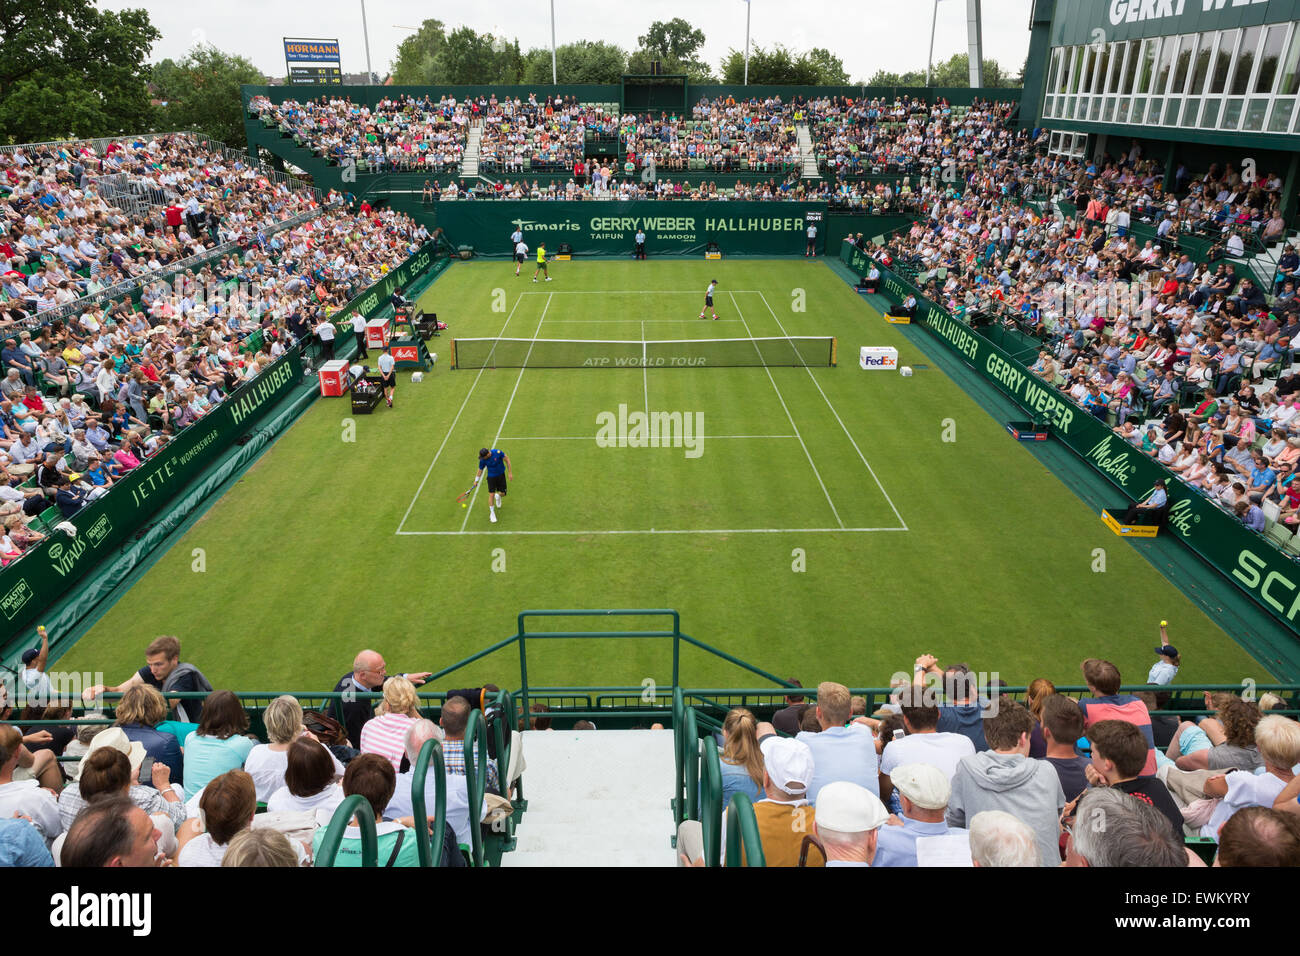 A packed number 1 court in the qualifying rounds of the ATP Gerry Weber Open Tennis Championships Stock Photo